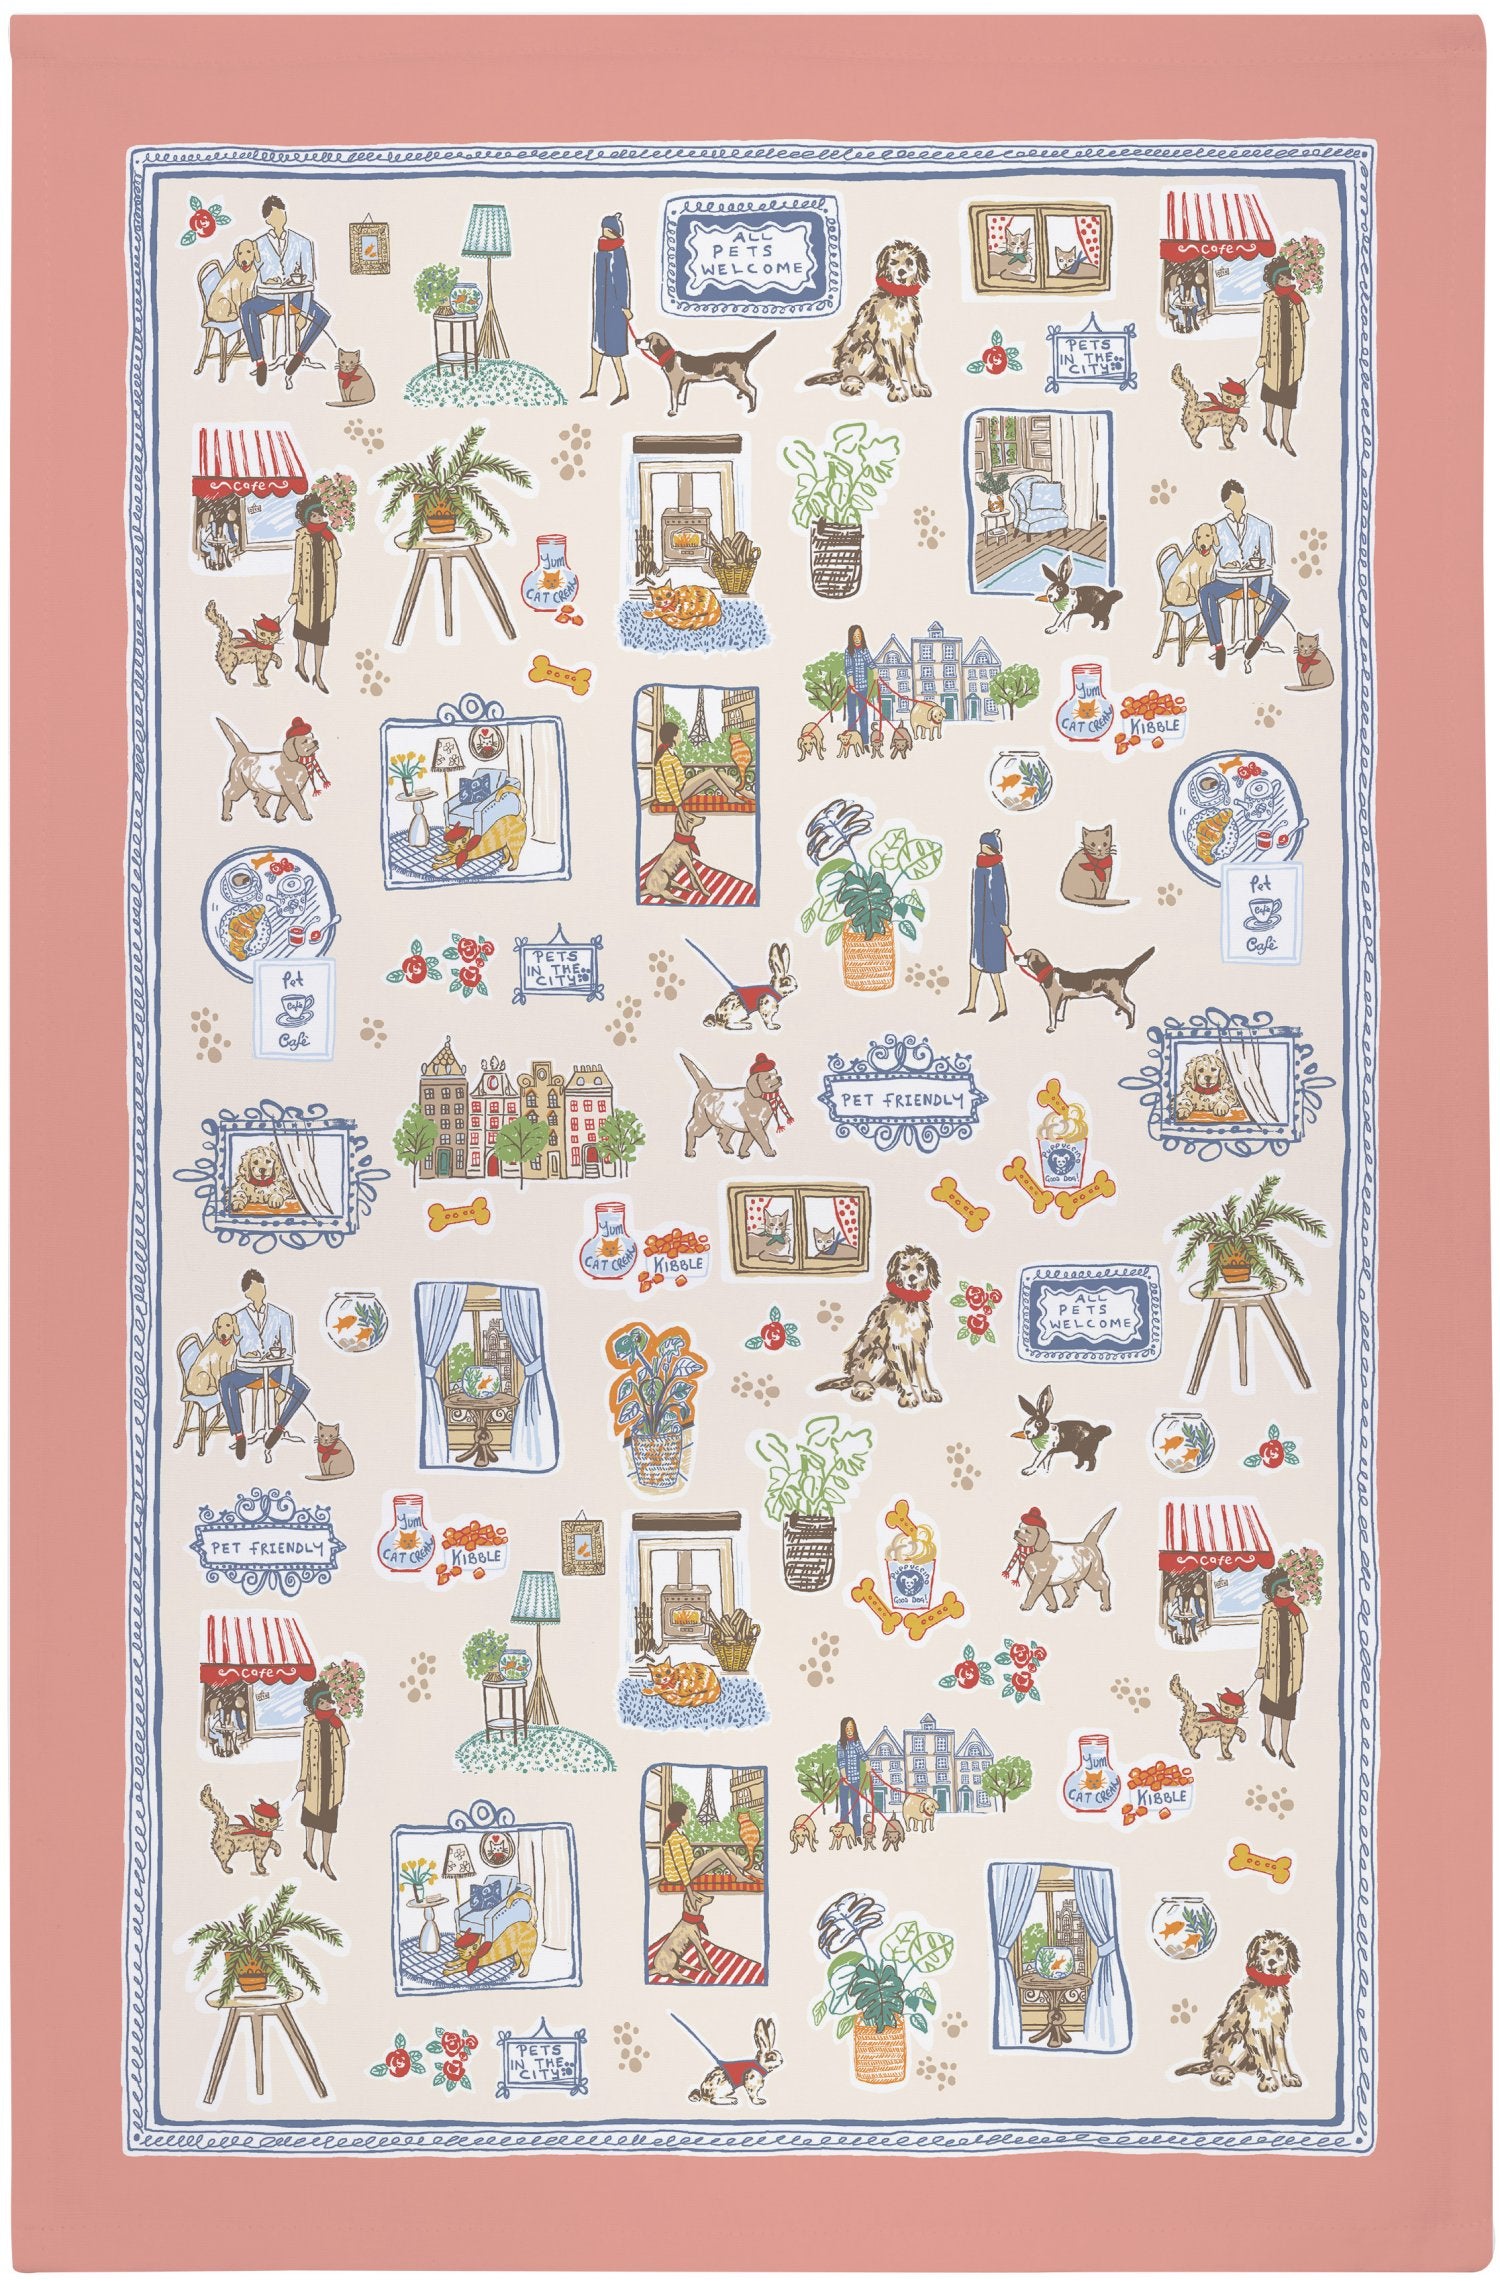 Ulster Weavers, "Pets in The City", Printed cotton tea towel.